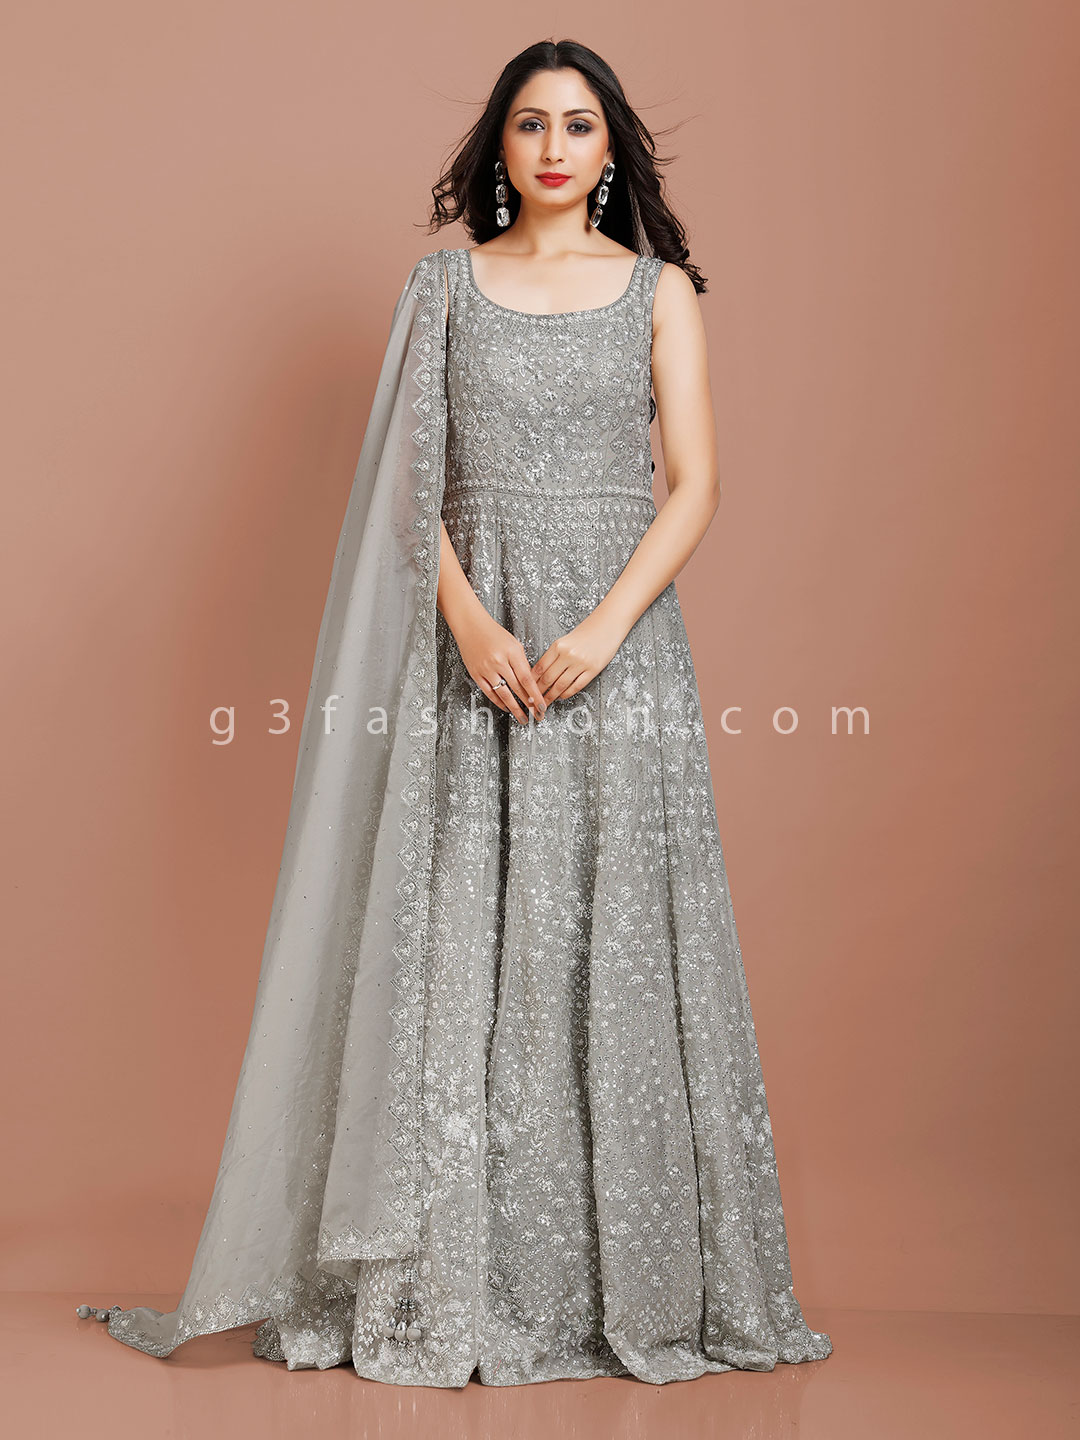 anarkali gown wedding guest outfit